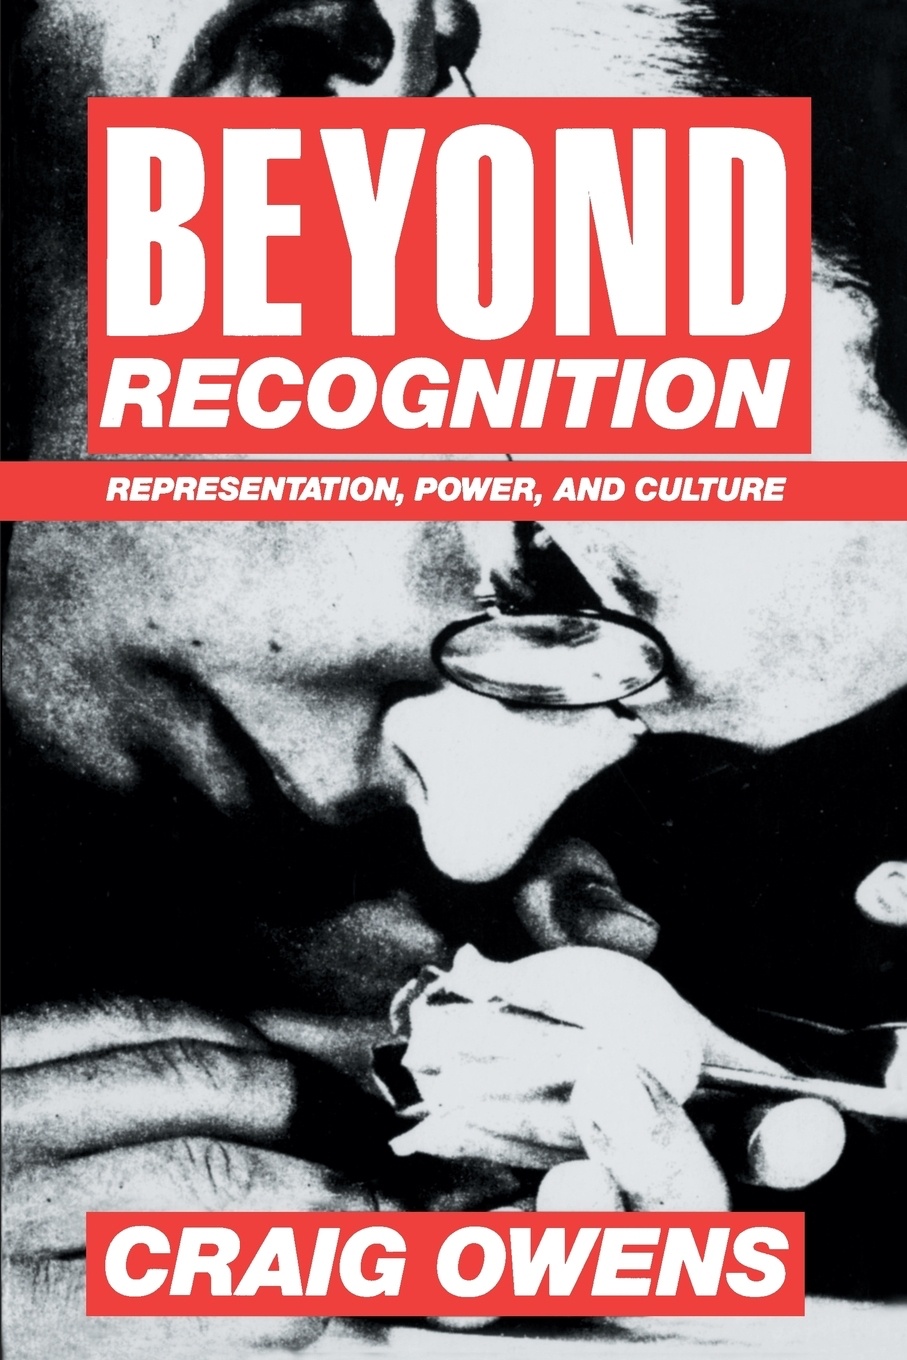 "Beyond Recognition," a collection of writings by Craig Owens, published by University of California Press in 1994. Edited by Scott Bryson, Barbara Kruger, Lynne Tillman, and Jane Weinstock with an introduction by Simon Watney.